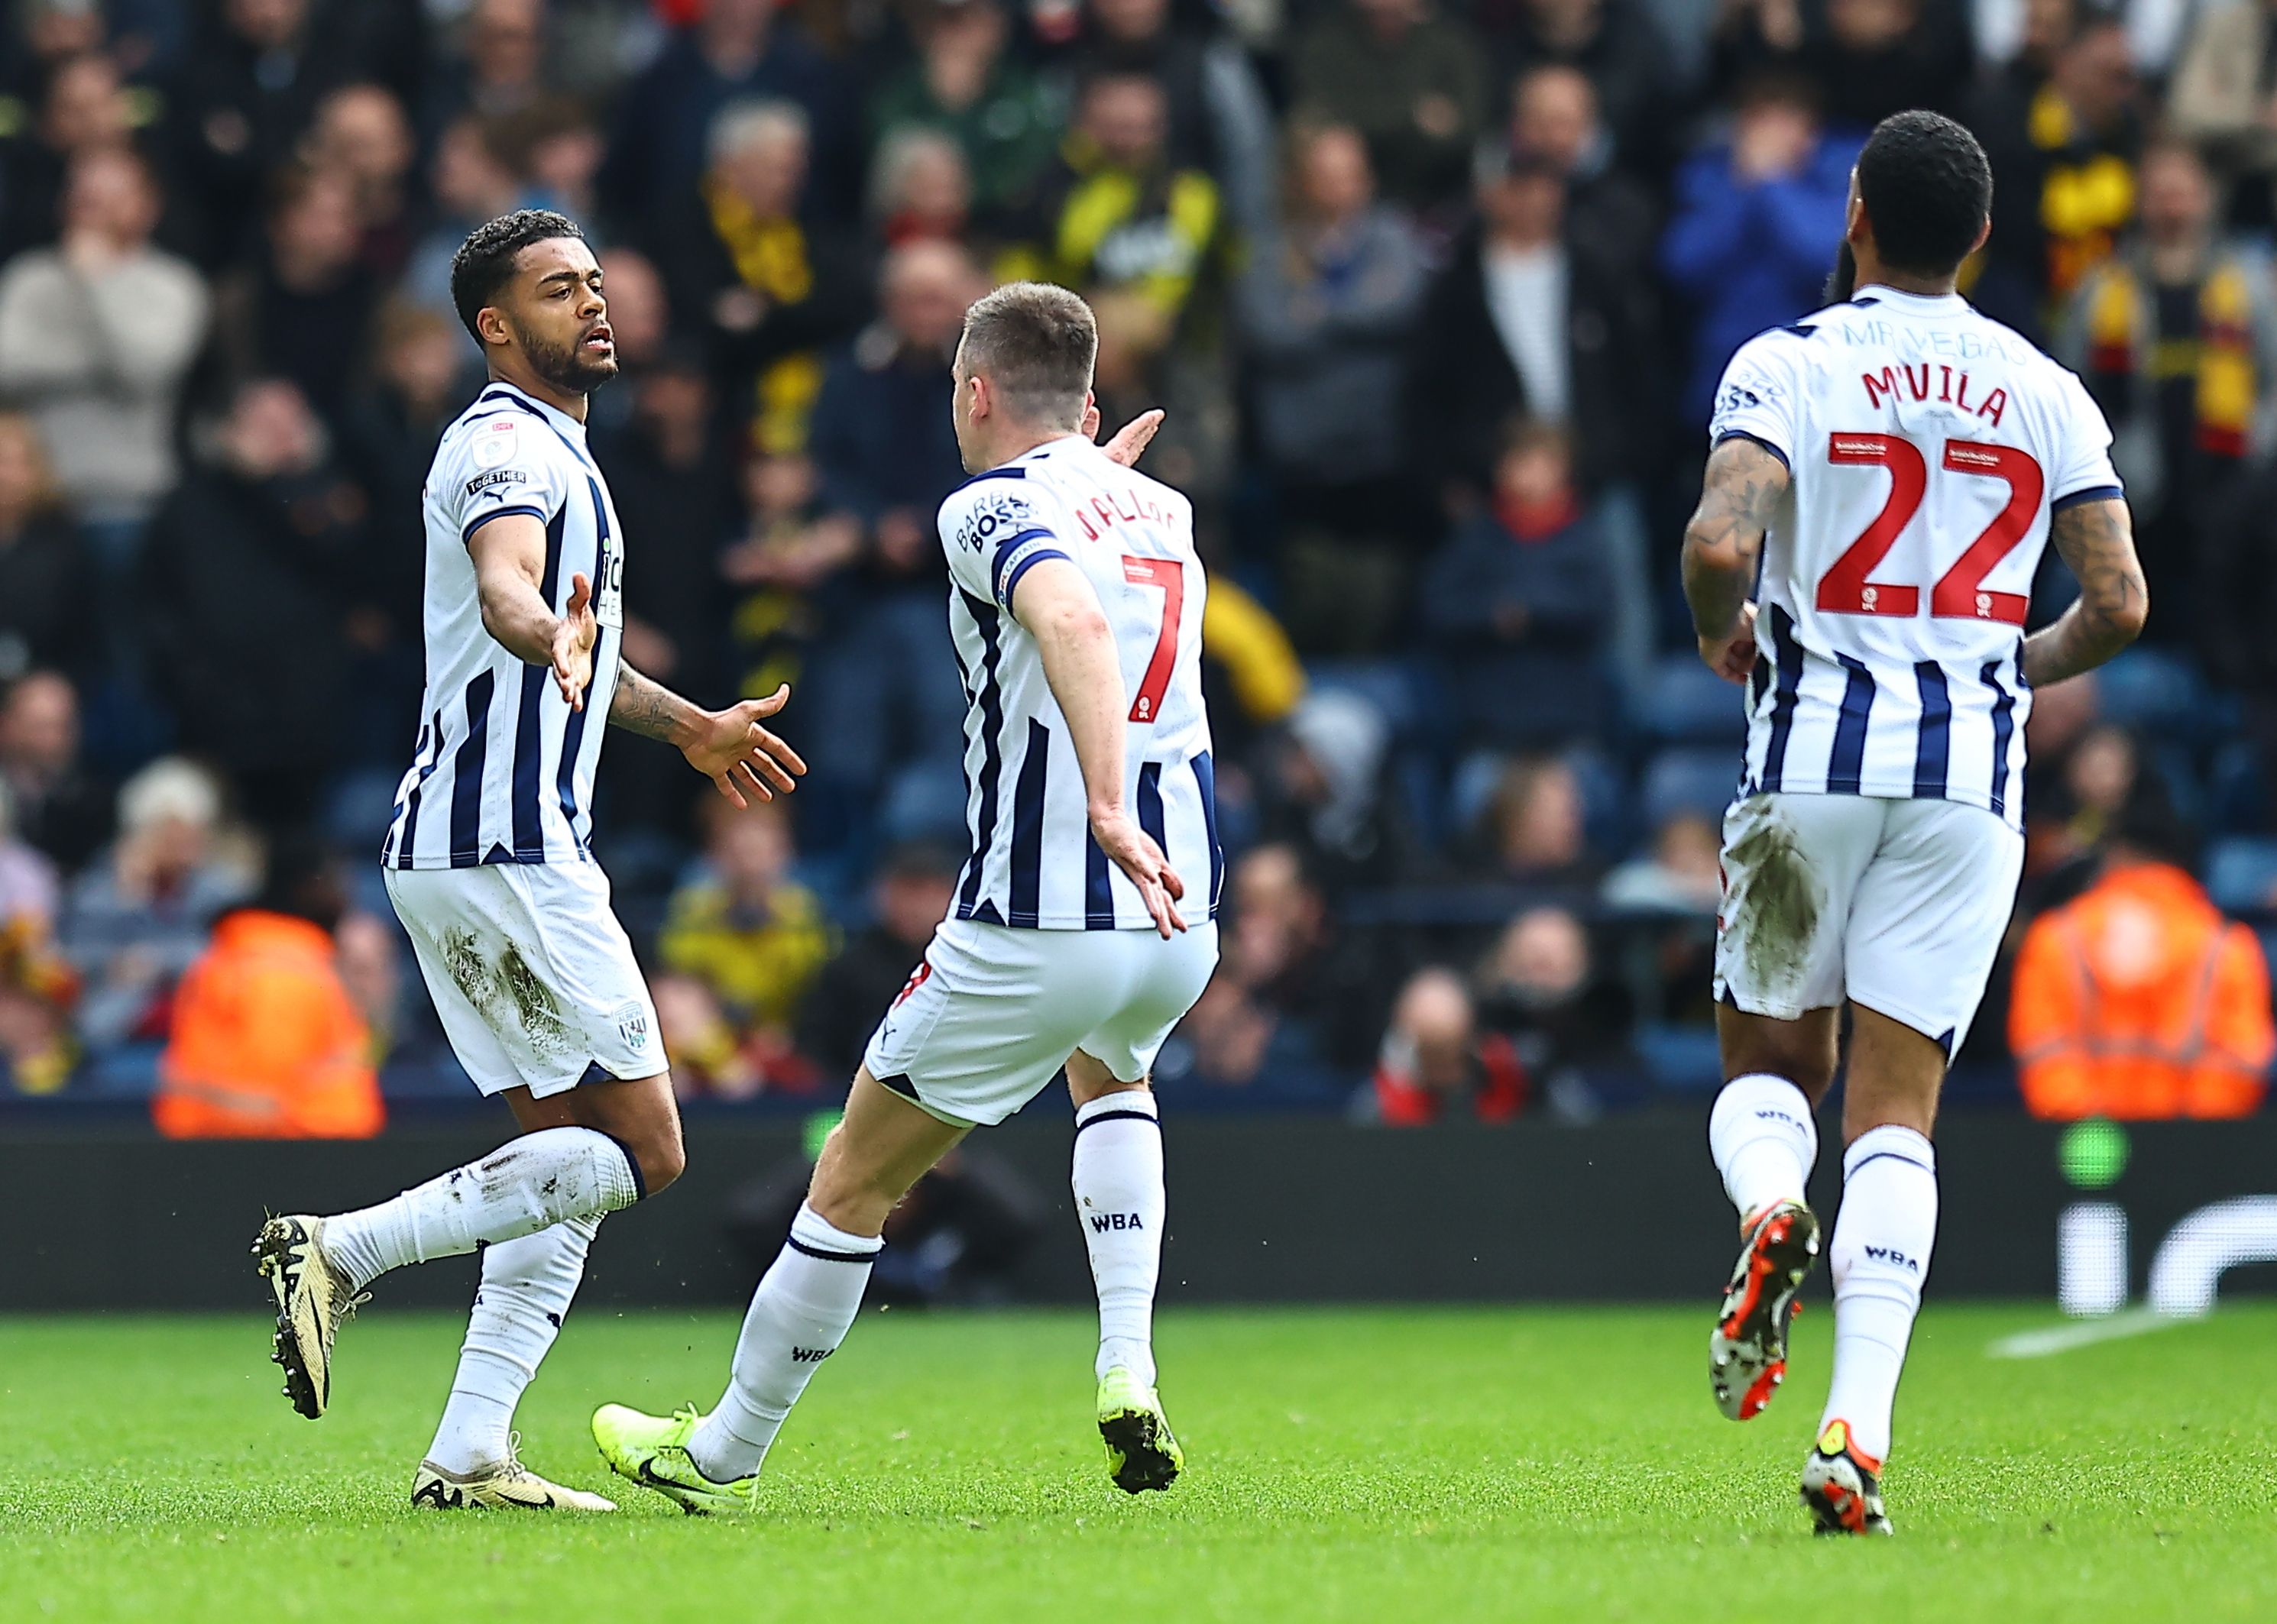 Darnell Furlong celebrates his goal against Watford at The Hawthorns with Jed Wallace